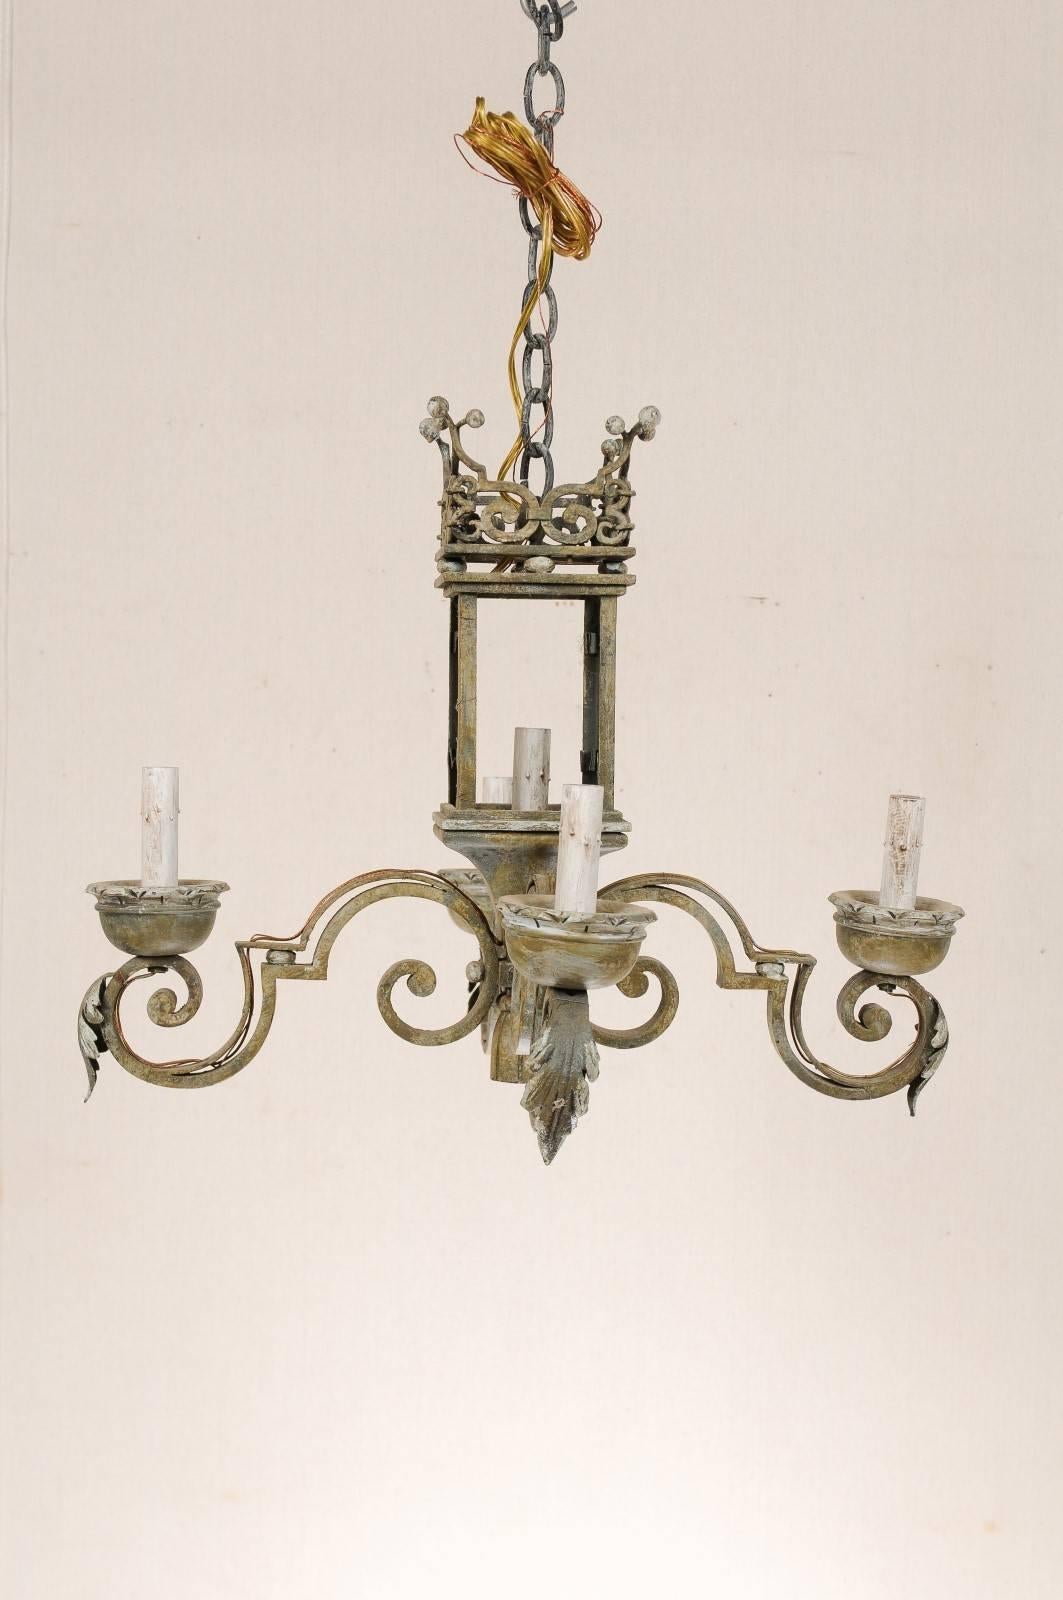 20th Century Italian Chandelier with Regal Crown at the Top, Hand-Forged Iron & Painted Wood